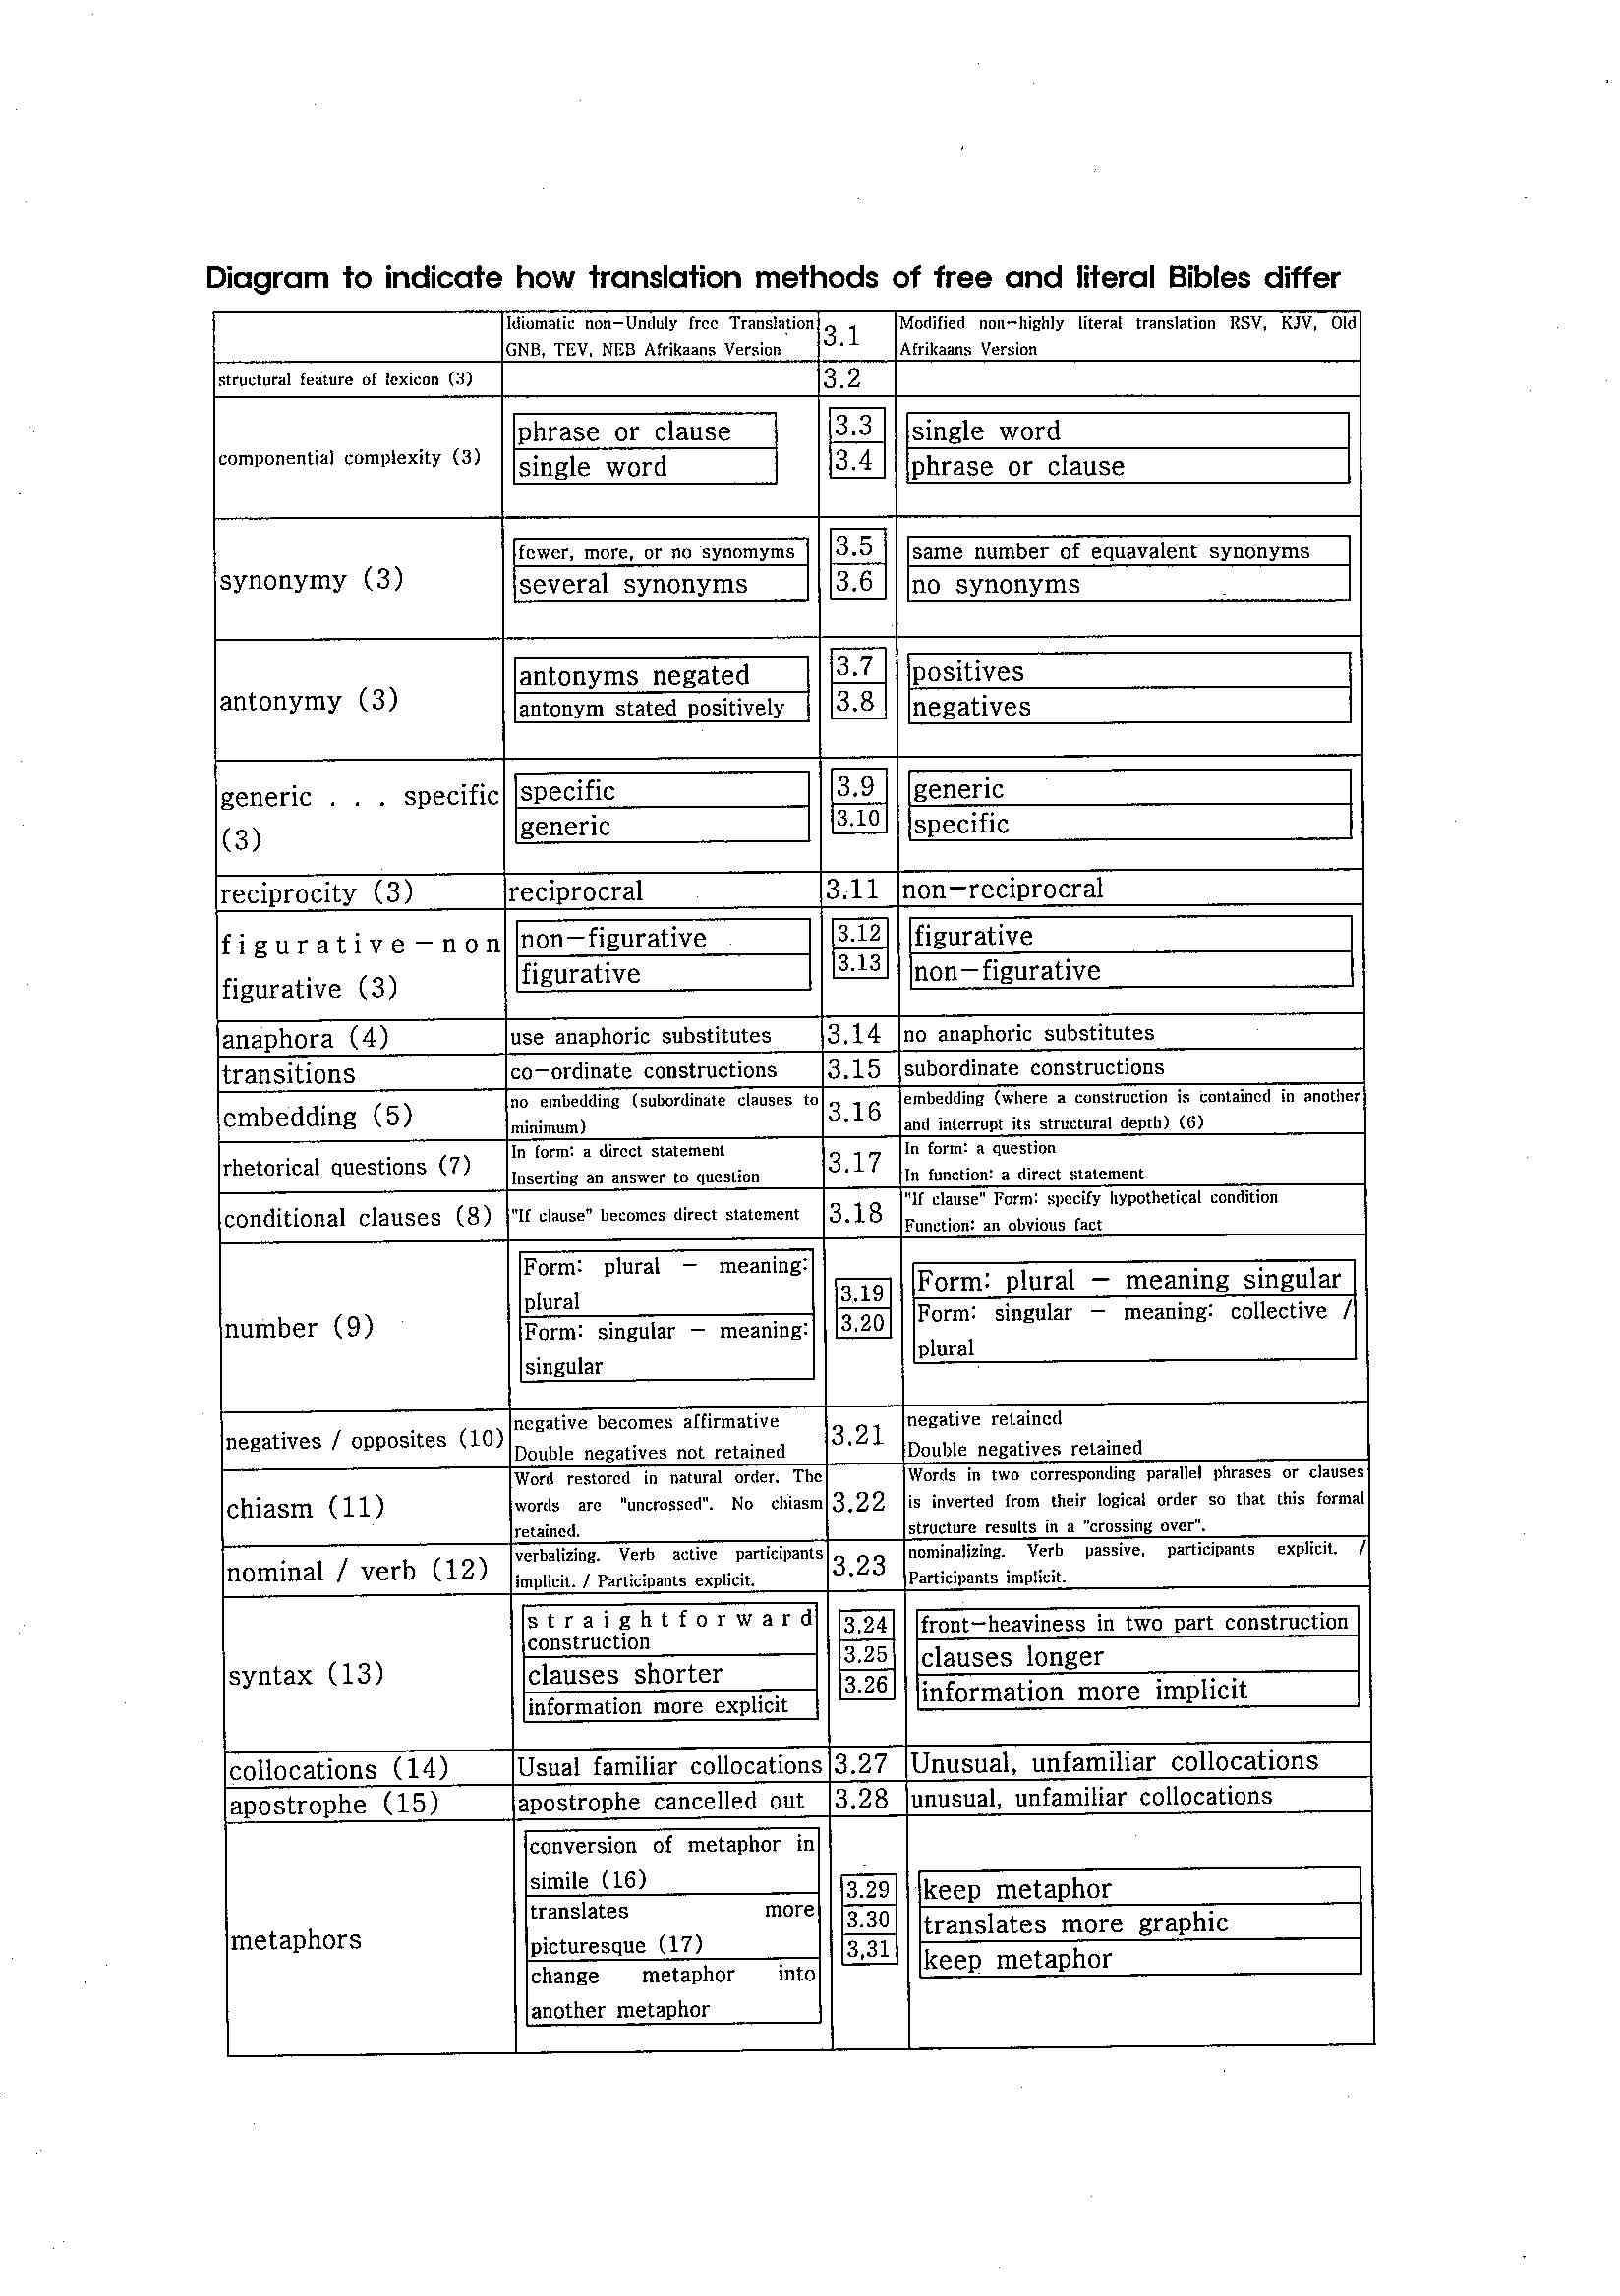 Diagram to see translations of Bible 1.jpg